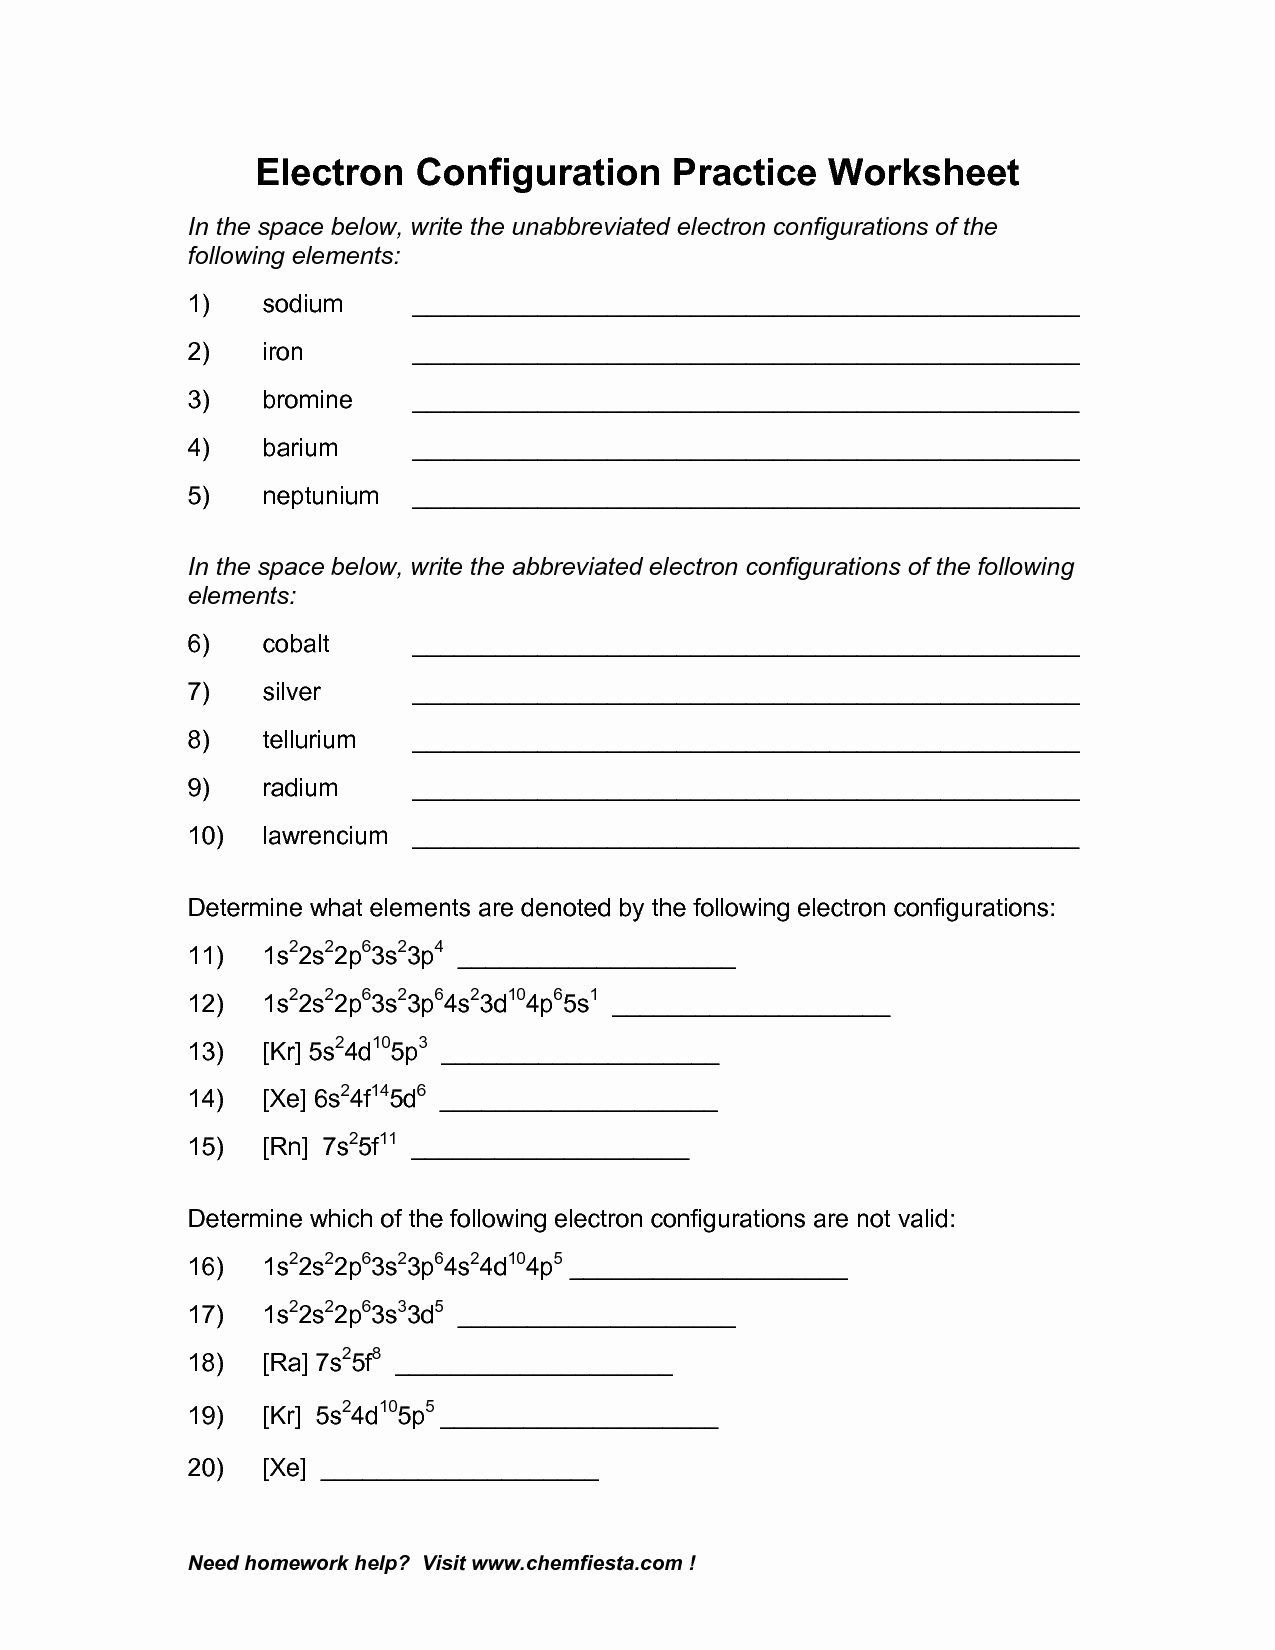 Electron Configuration Worksheet Answers Key New 11 Best Of atomic Structure Practice Worksheet